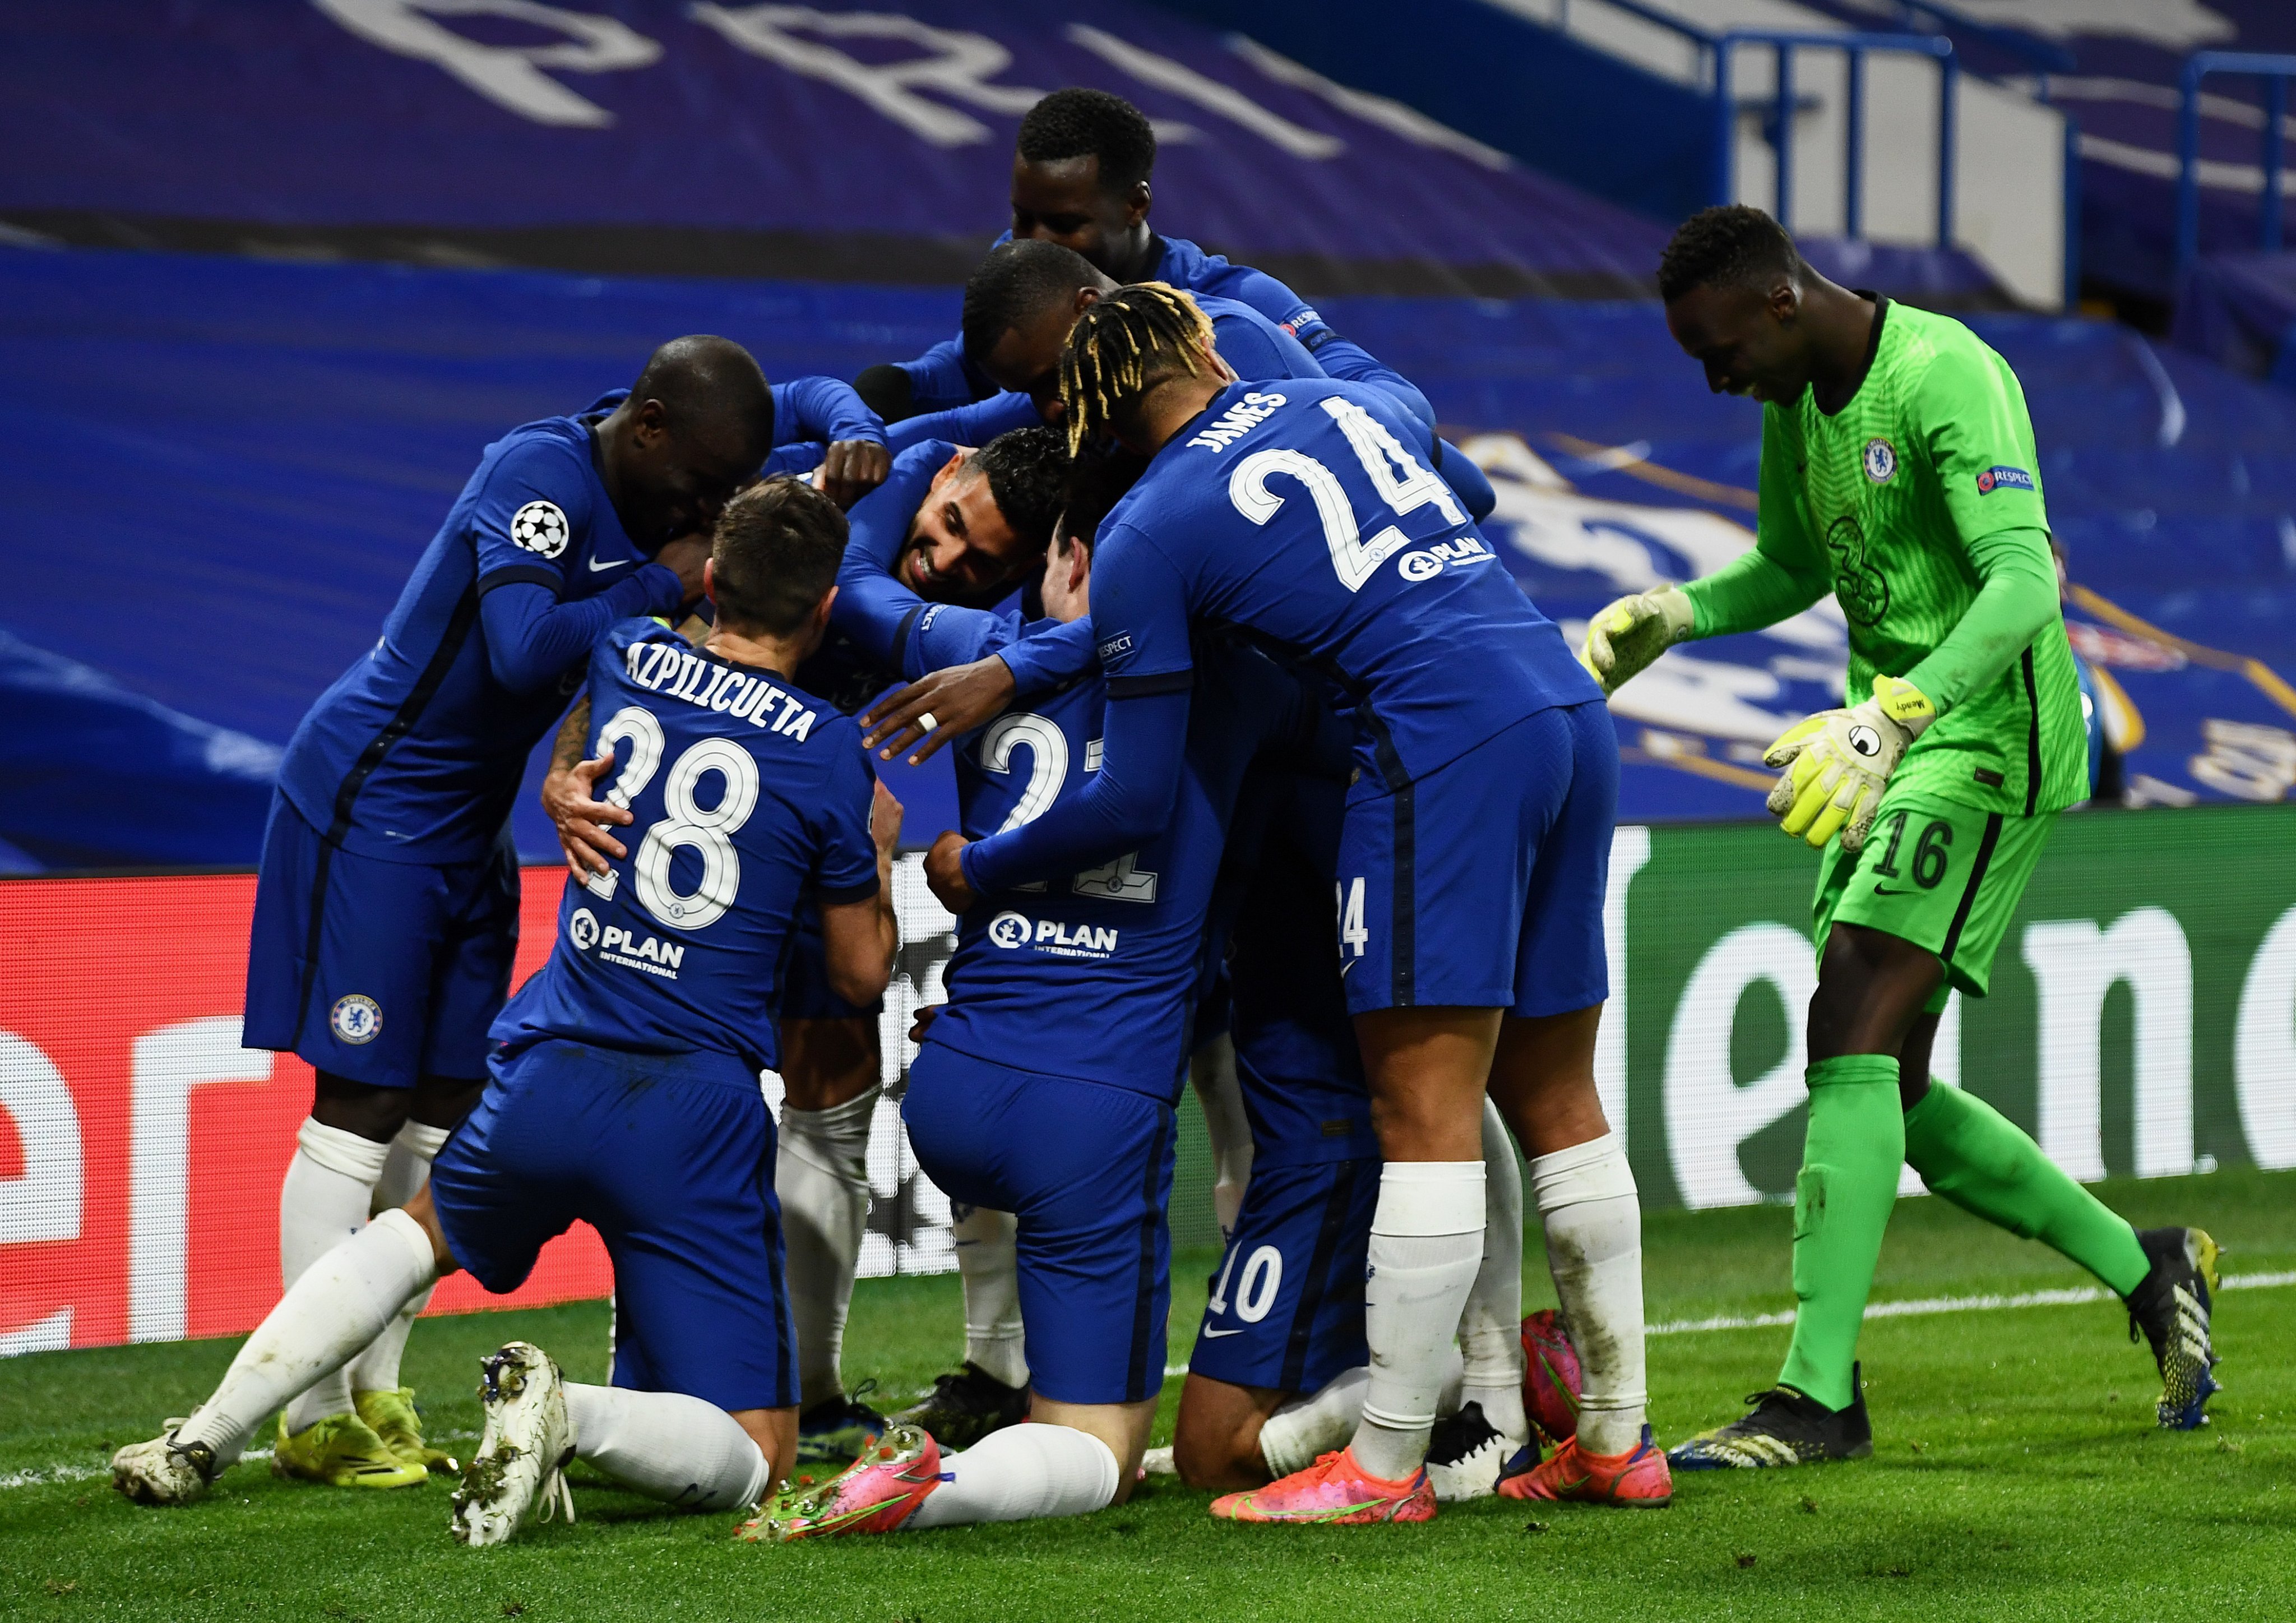 Chelsea 2-0 Atletico Madrid: Chiến thắng thuyết phục